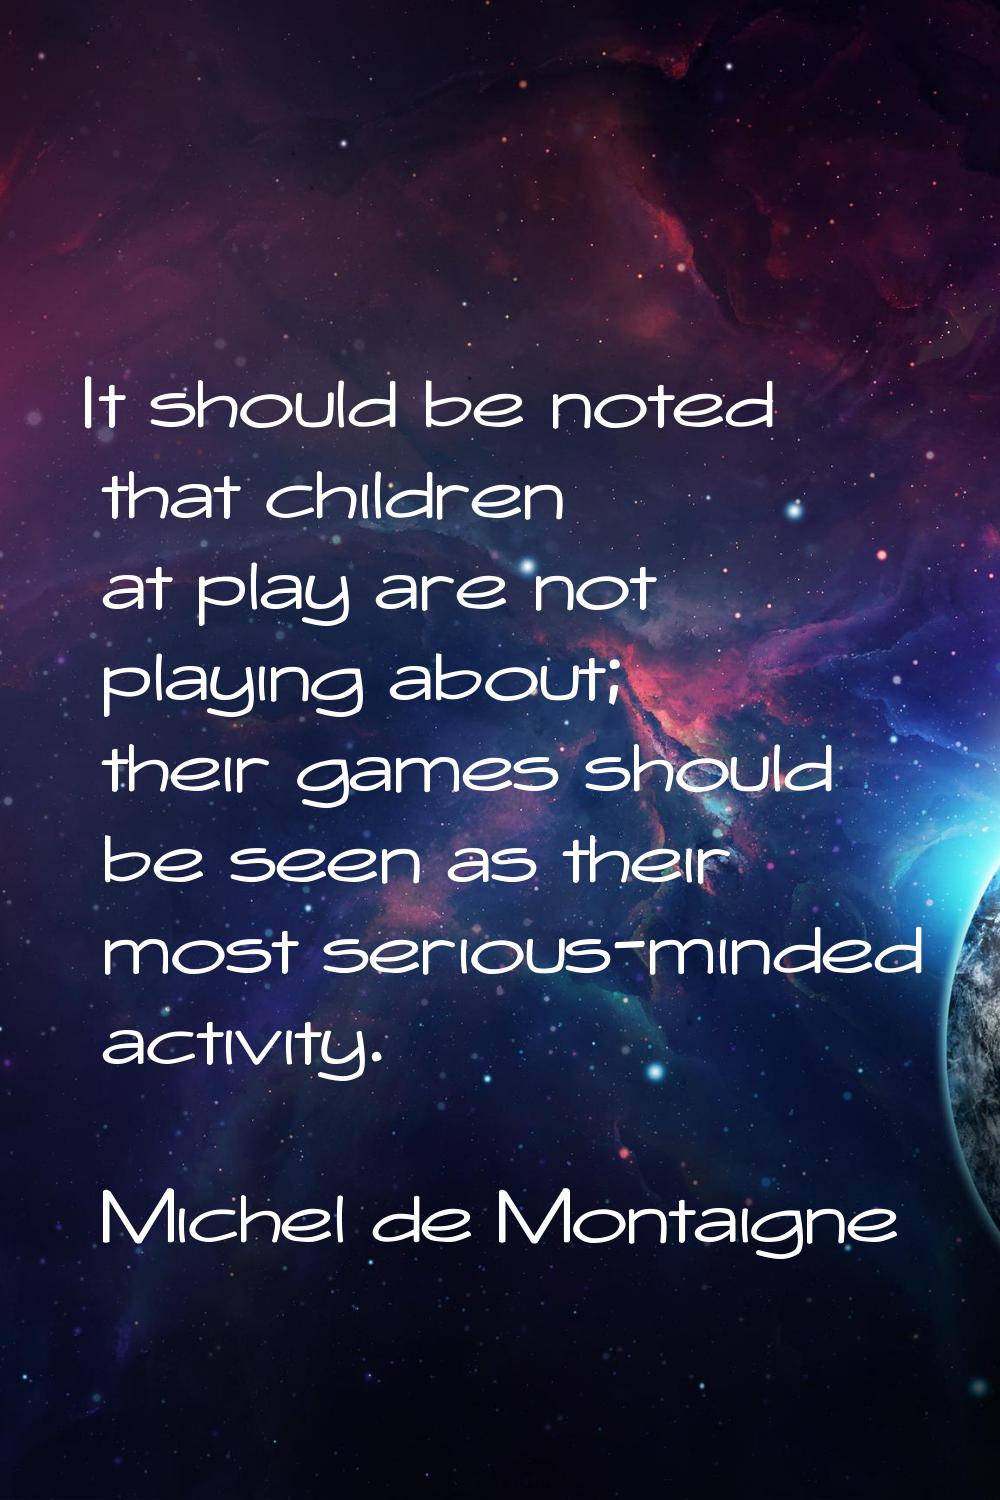 It should be noted that children at play are not playing about; their games should be seen as their